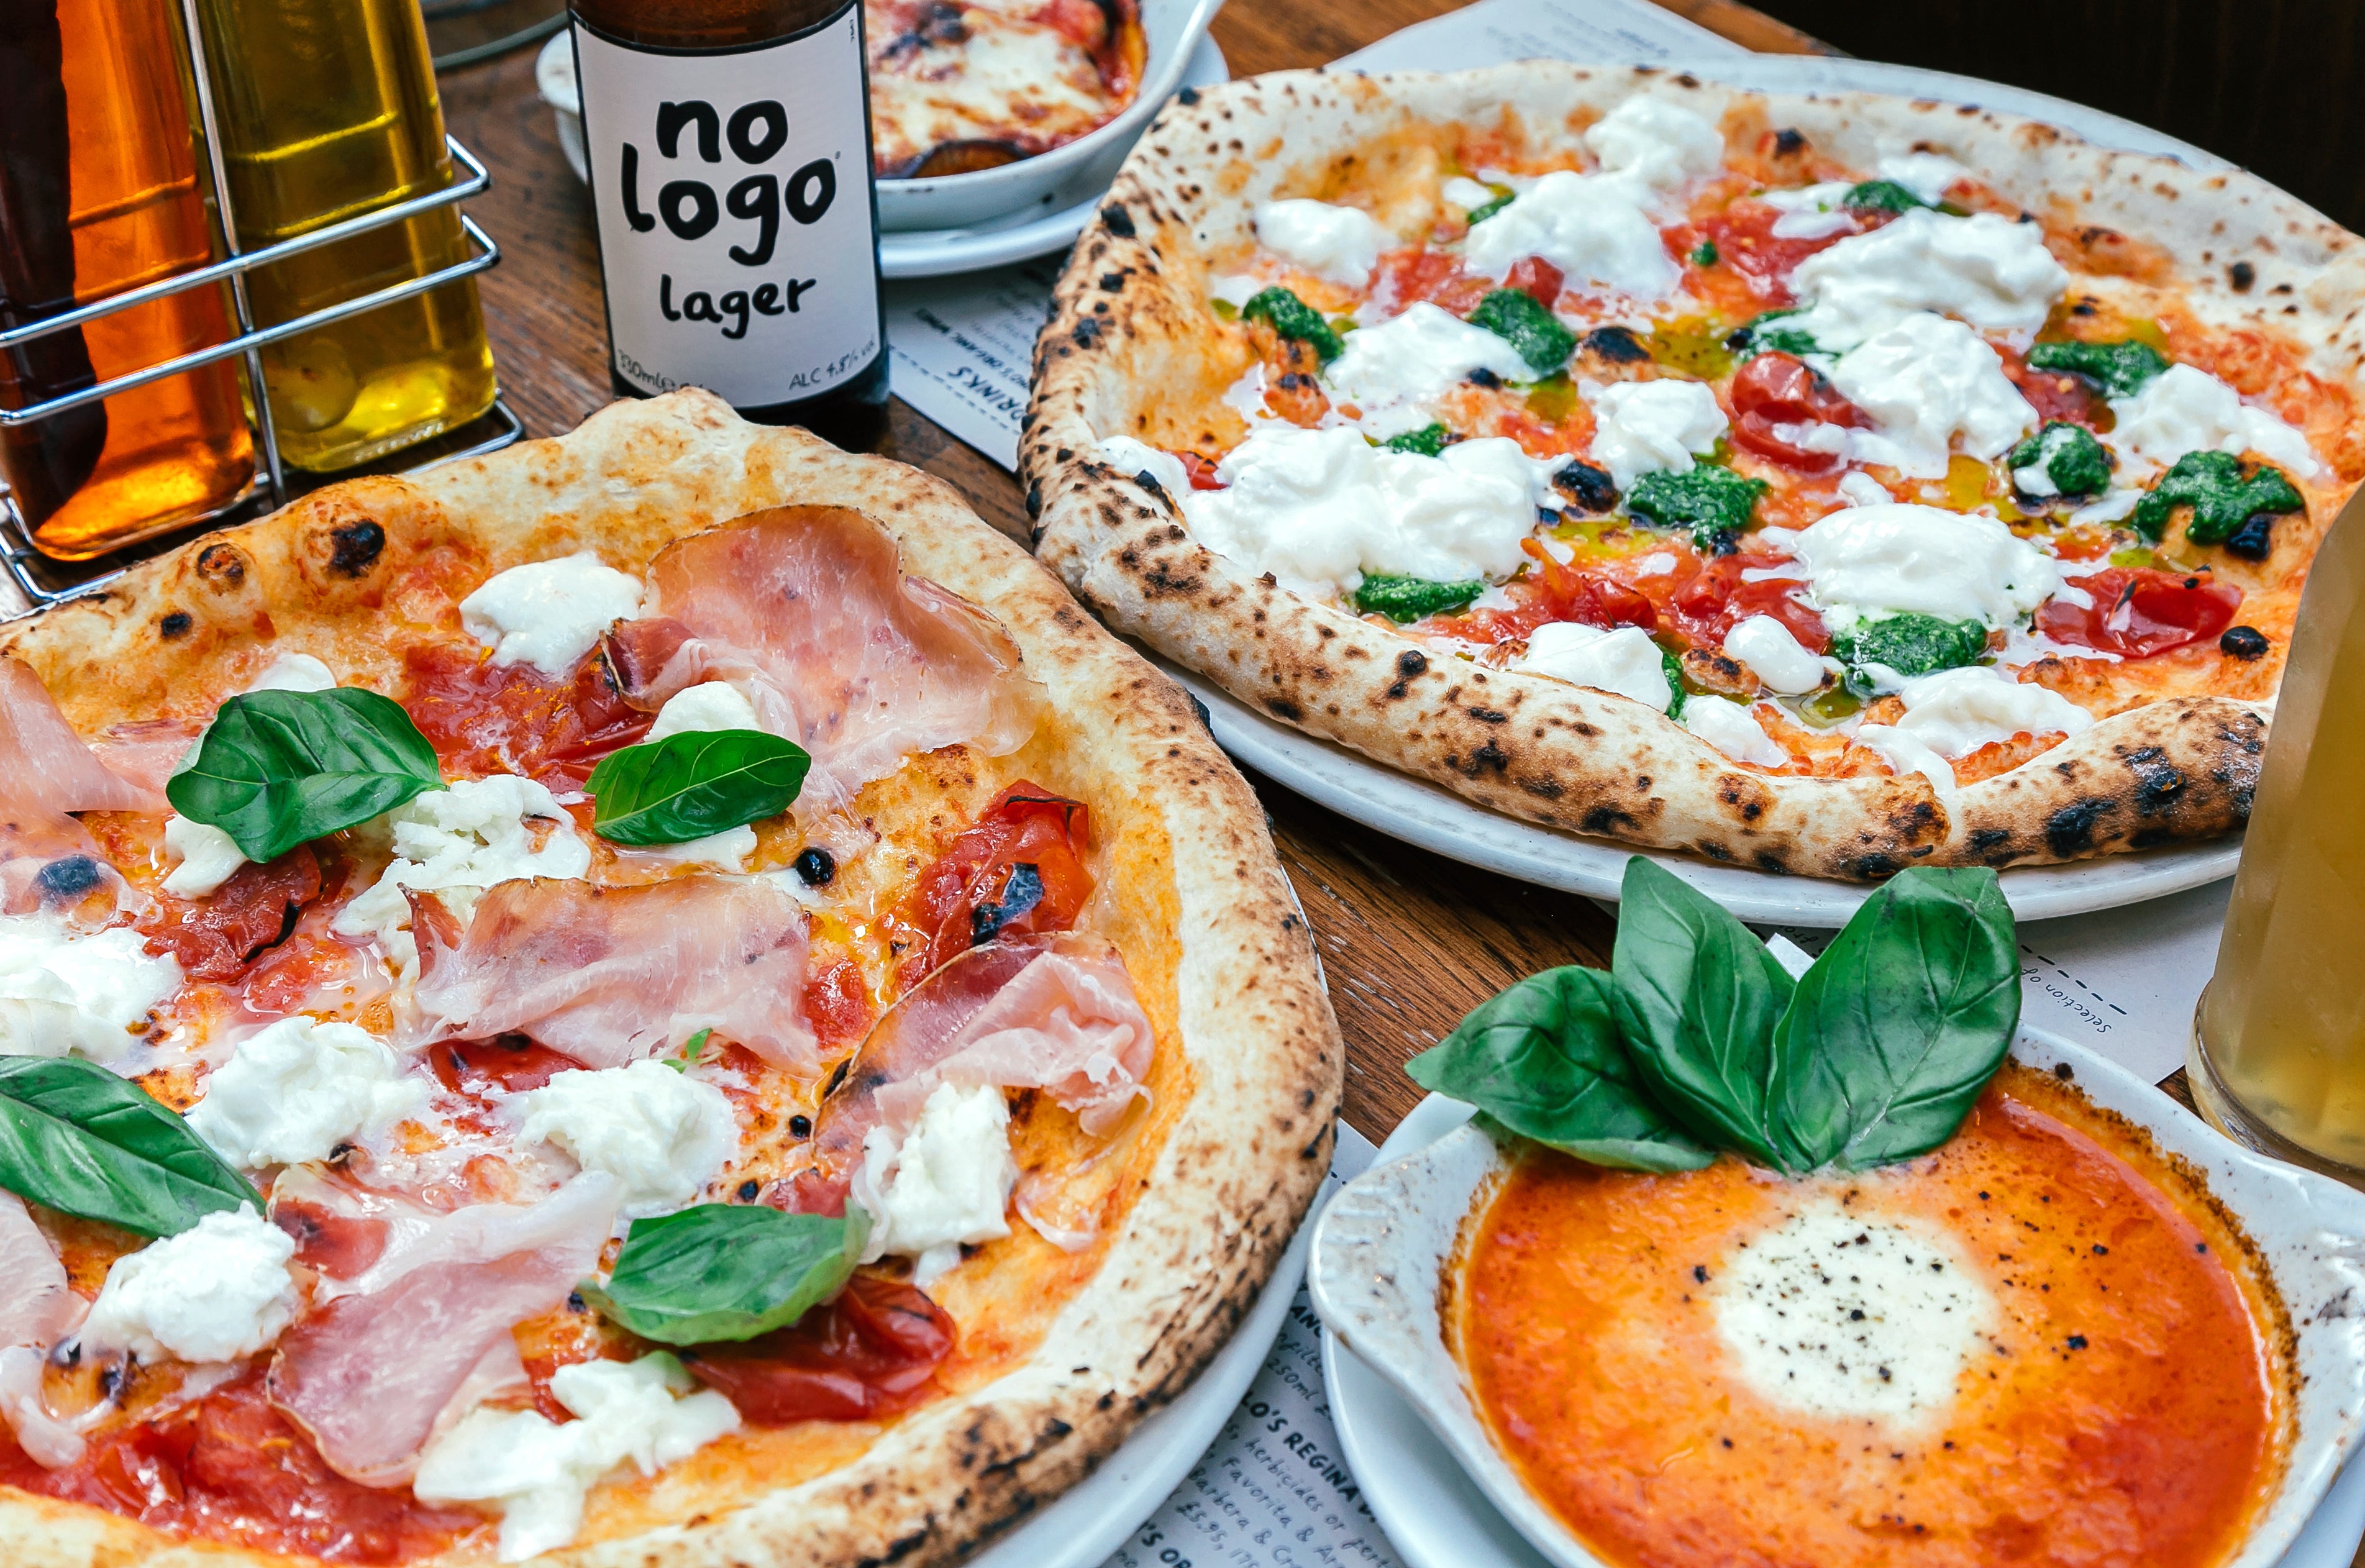 Fulham Shore is taking its Franco Manca pizza chain to Greece and will open at least six sites over the next three years (Fulham Shore/PA)